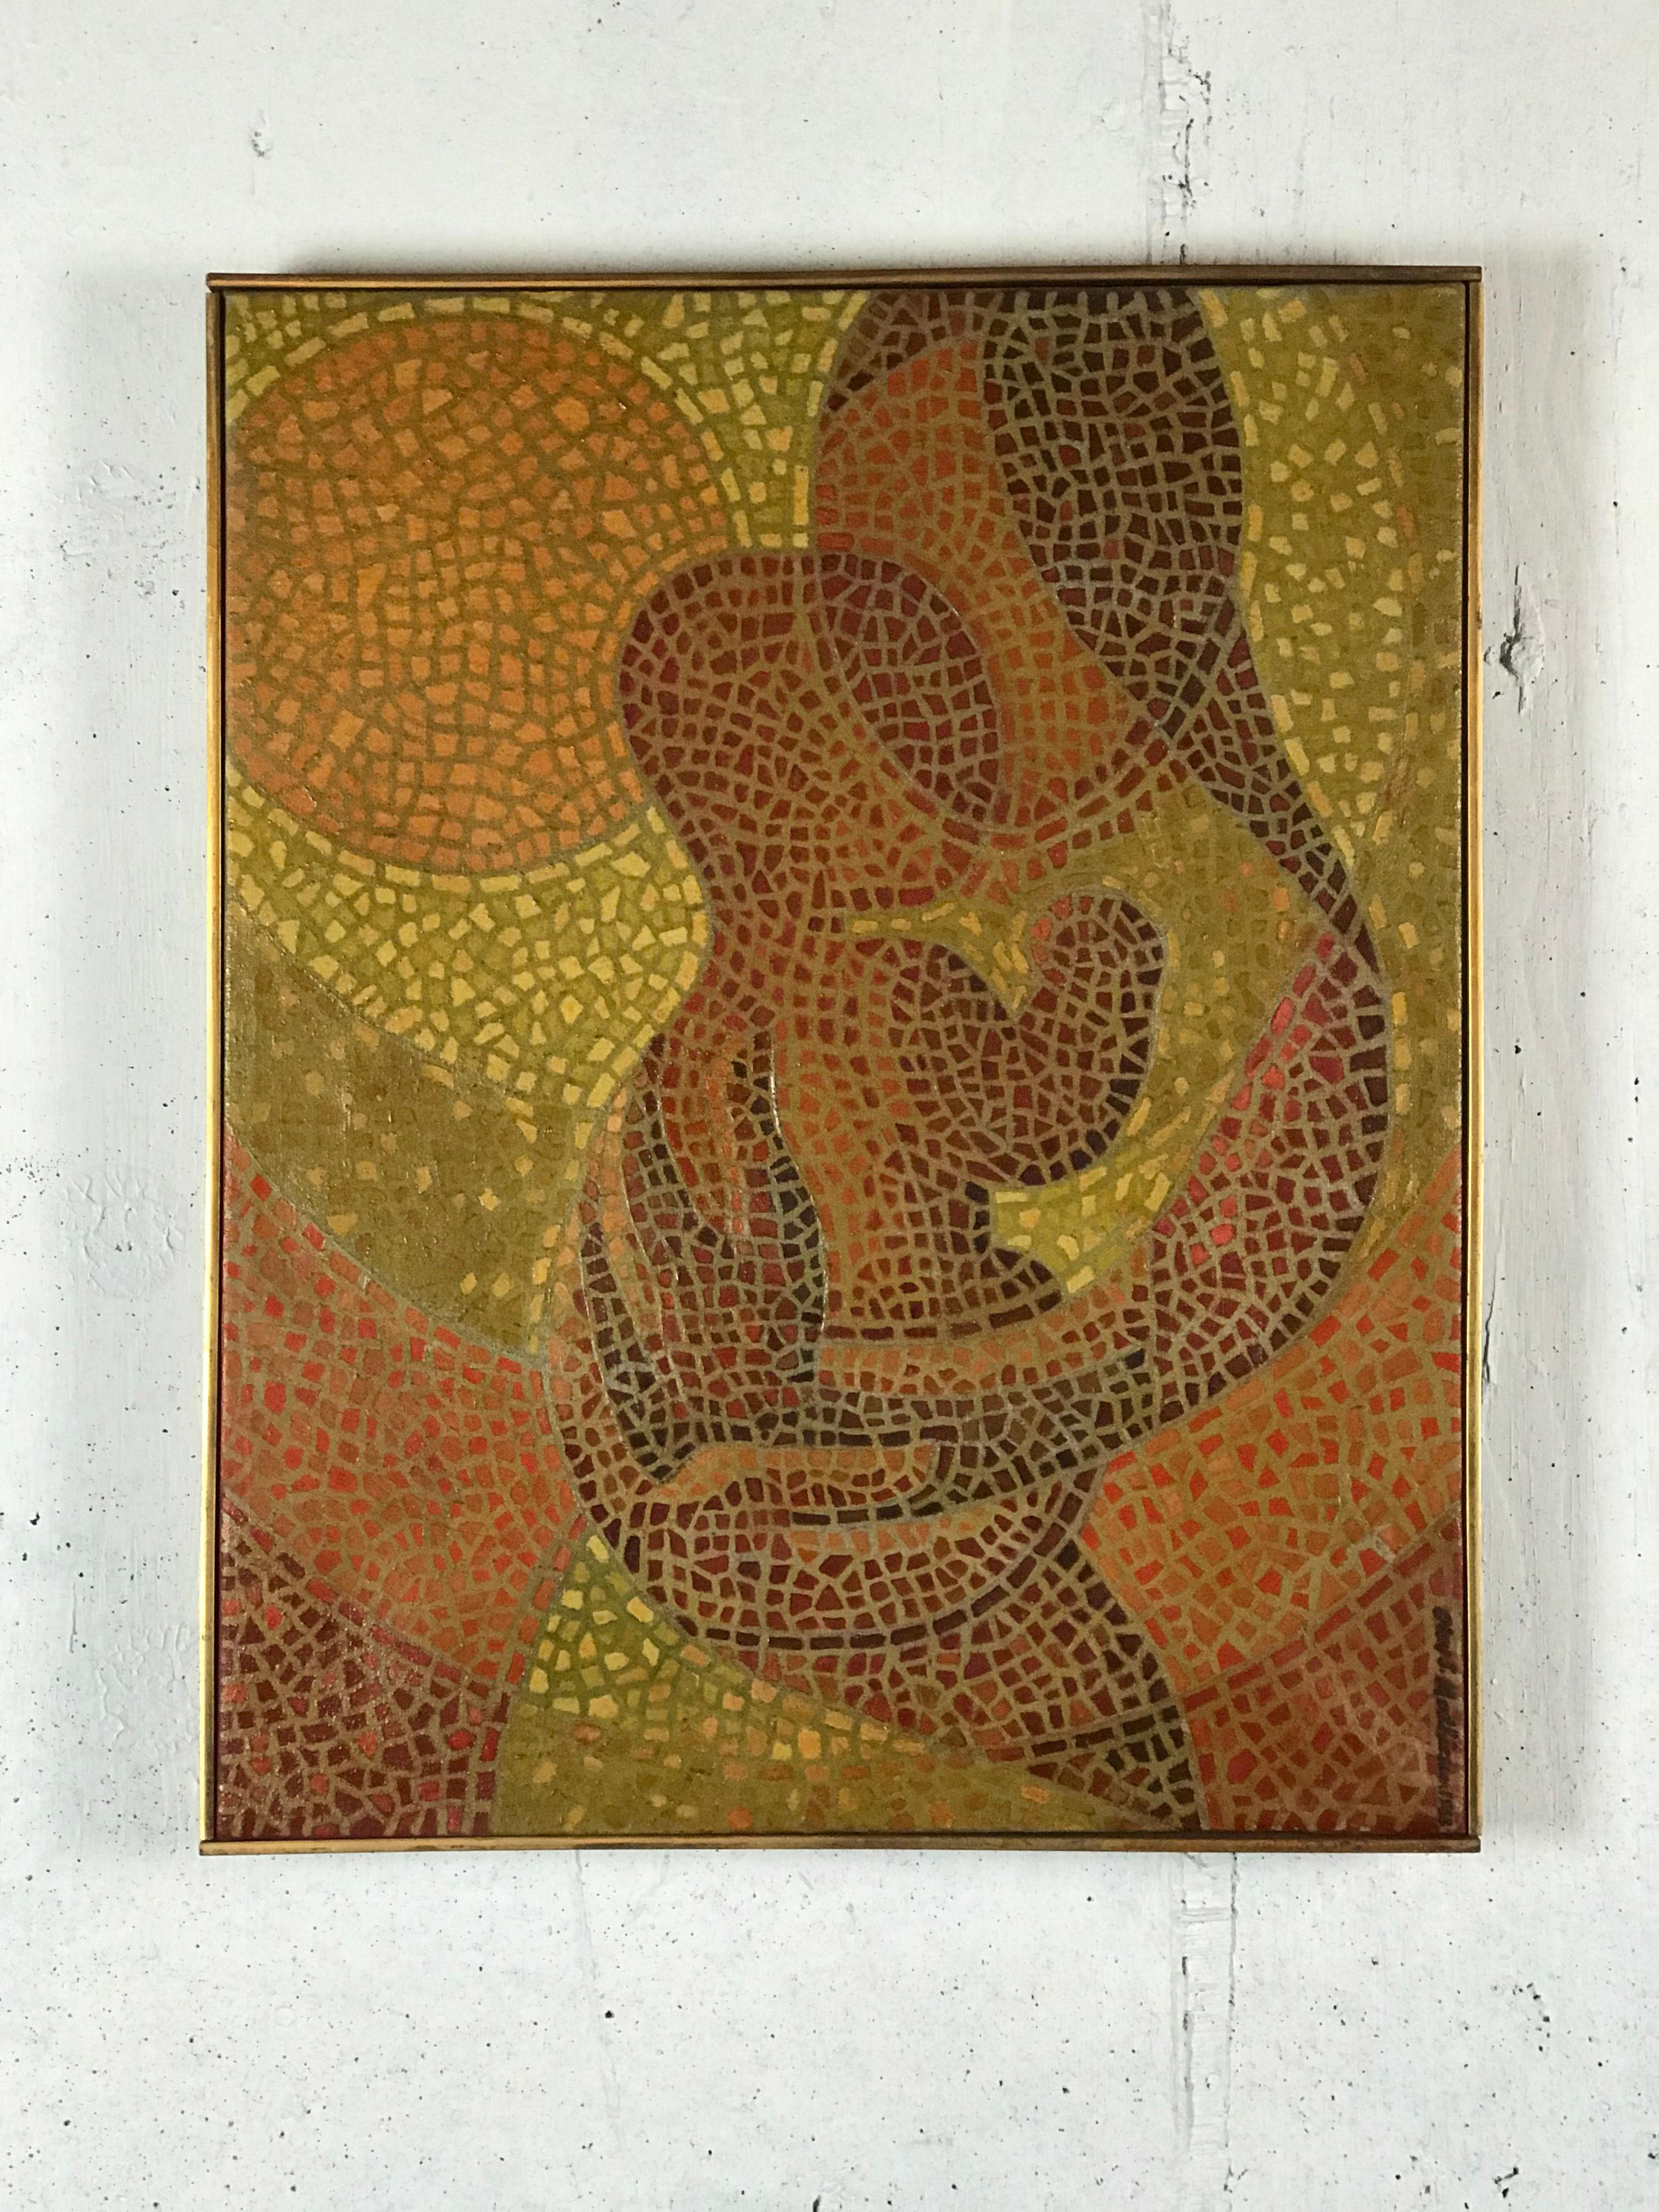 Madonna Mother & Child Mosaic Painting by Olav Mathiesen, Oil on Canvas, 1963 10